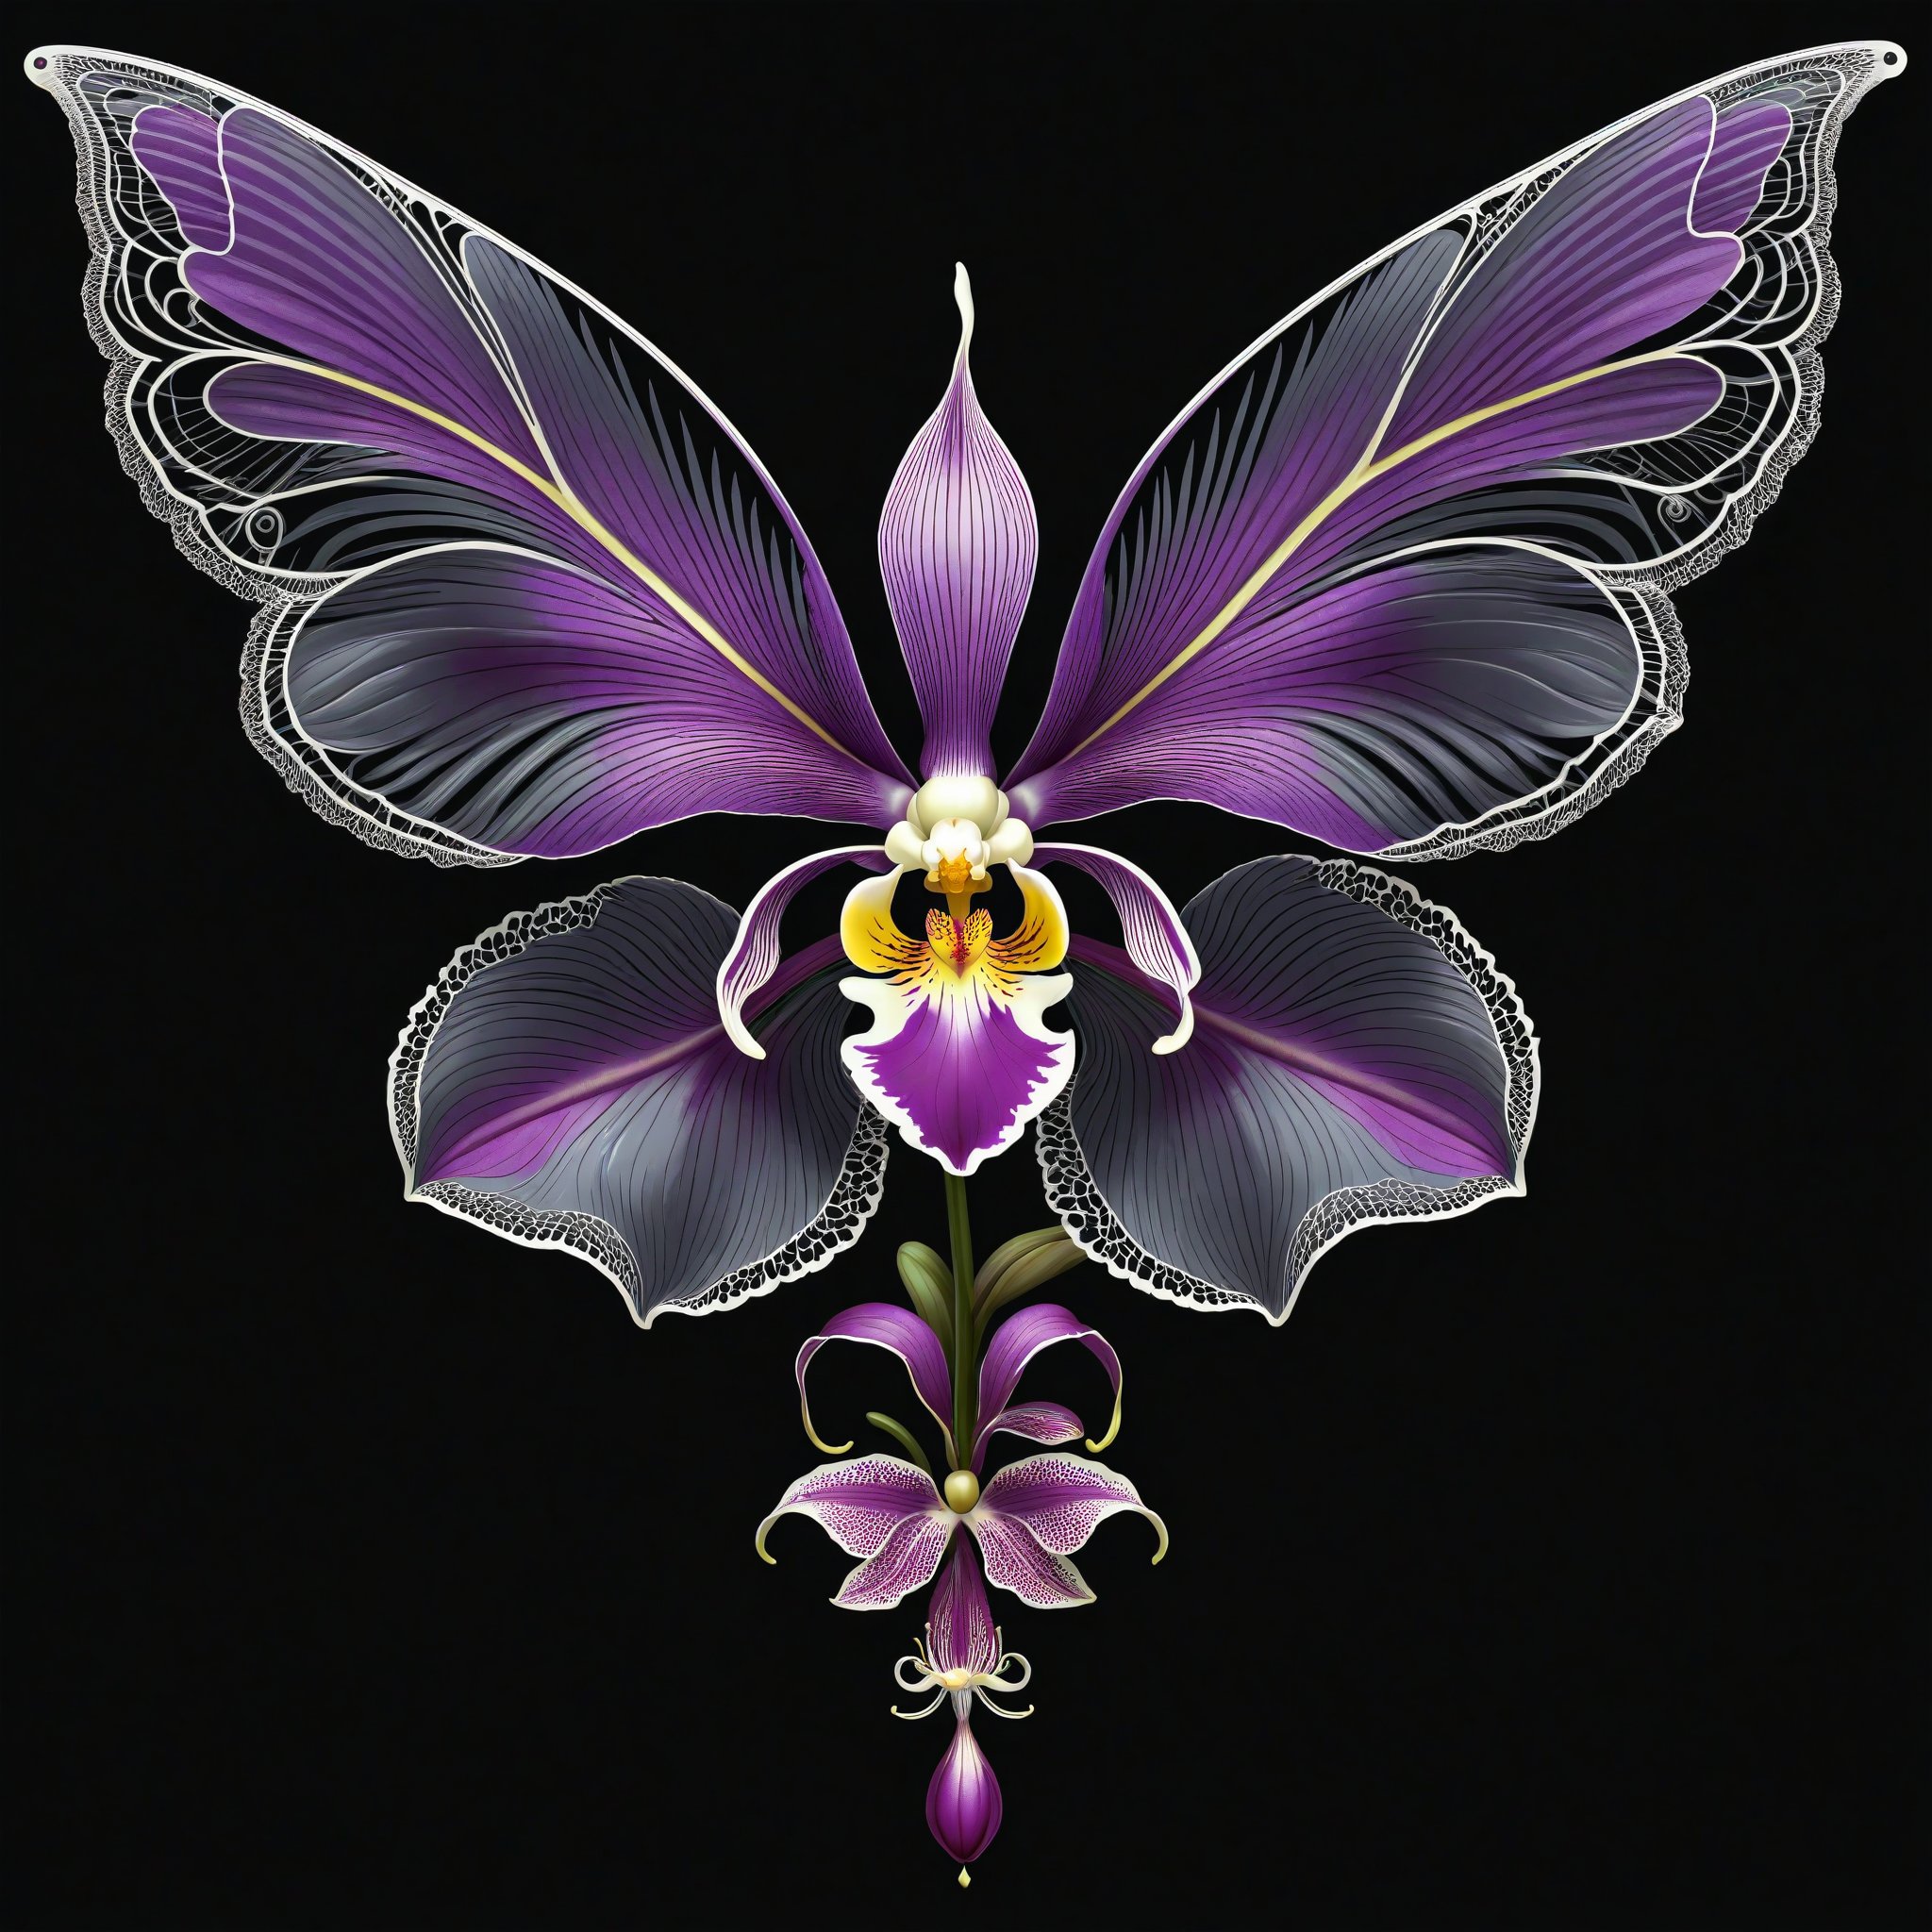 a Orchid flower whit wing majestic with clasic ornament Mechanical lines Elegance T-shirt design, BLACK BACKGROUND